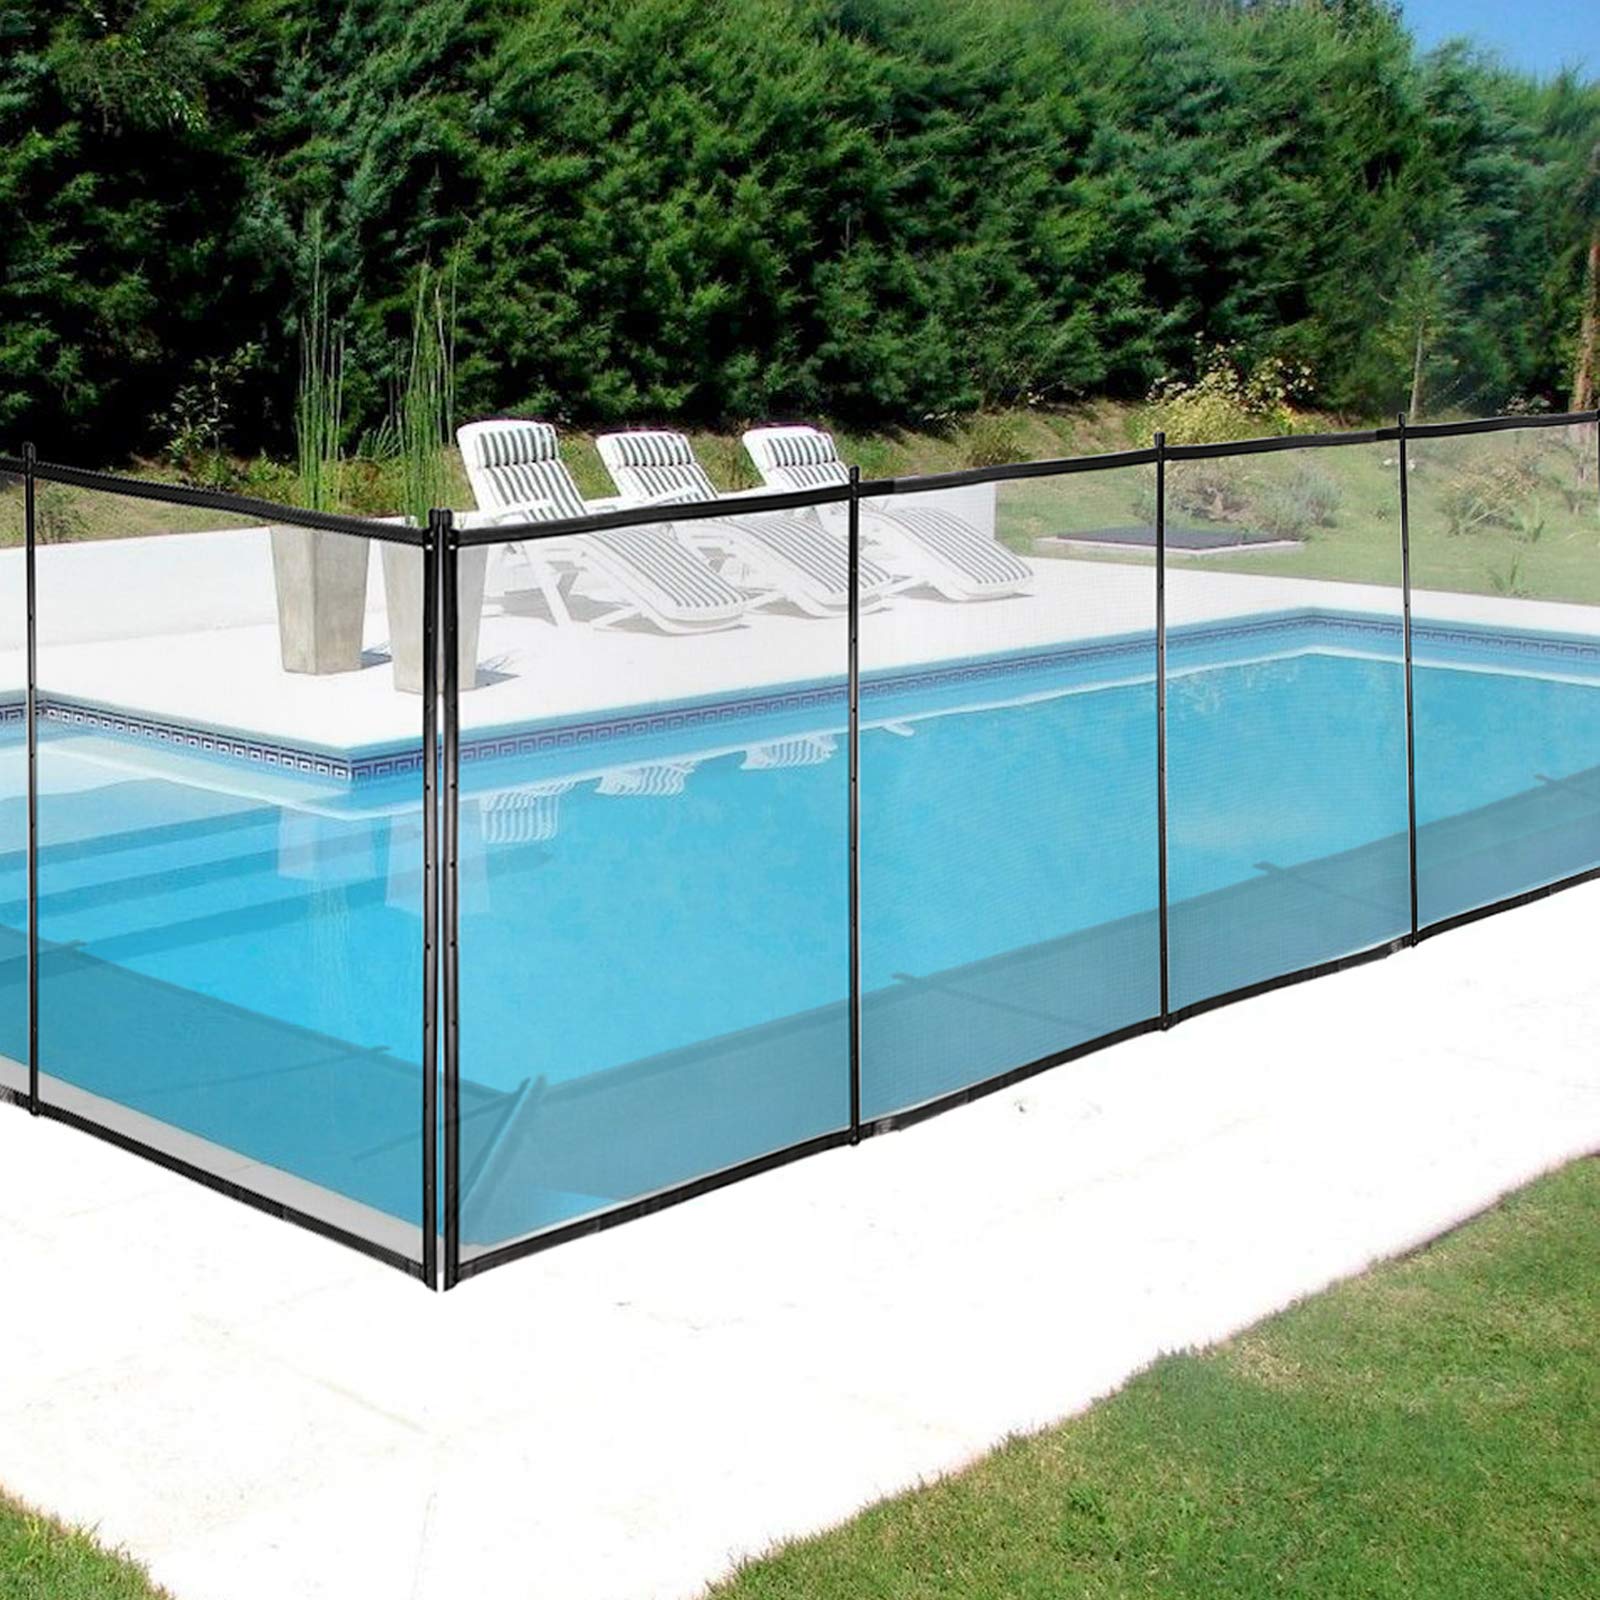 Transform Your Pool Area With These Privacy Enhancements